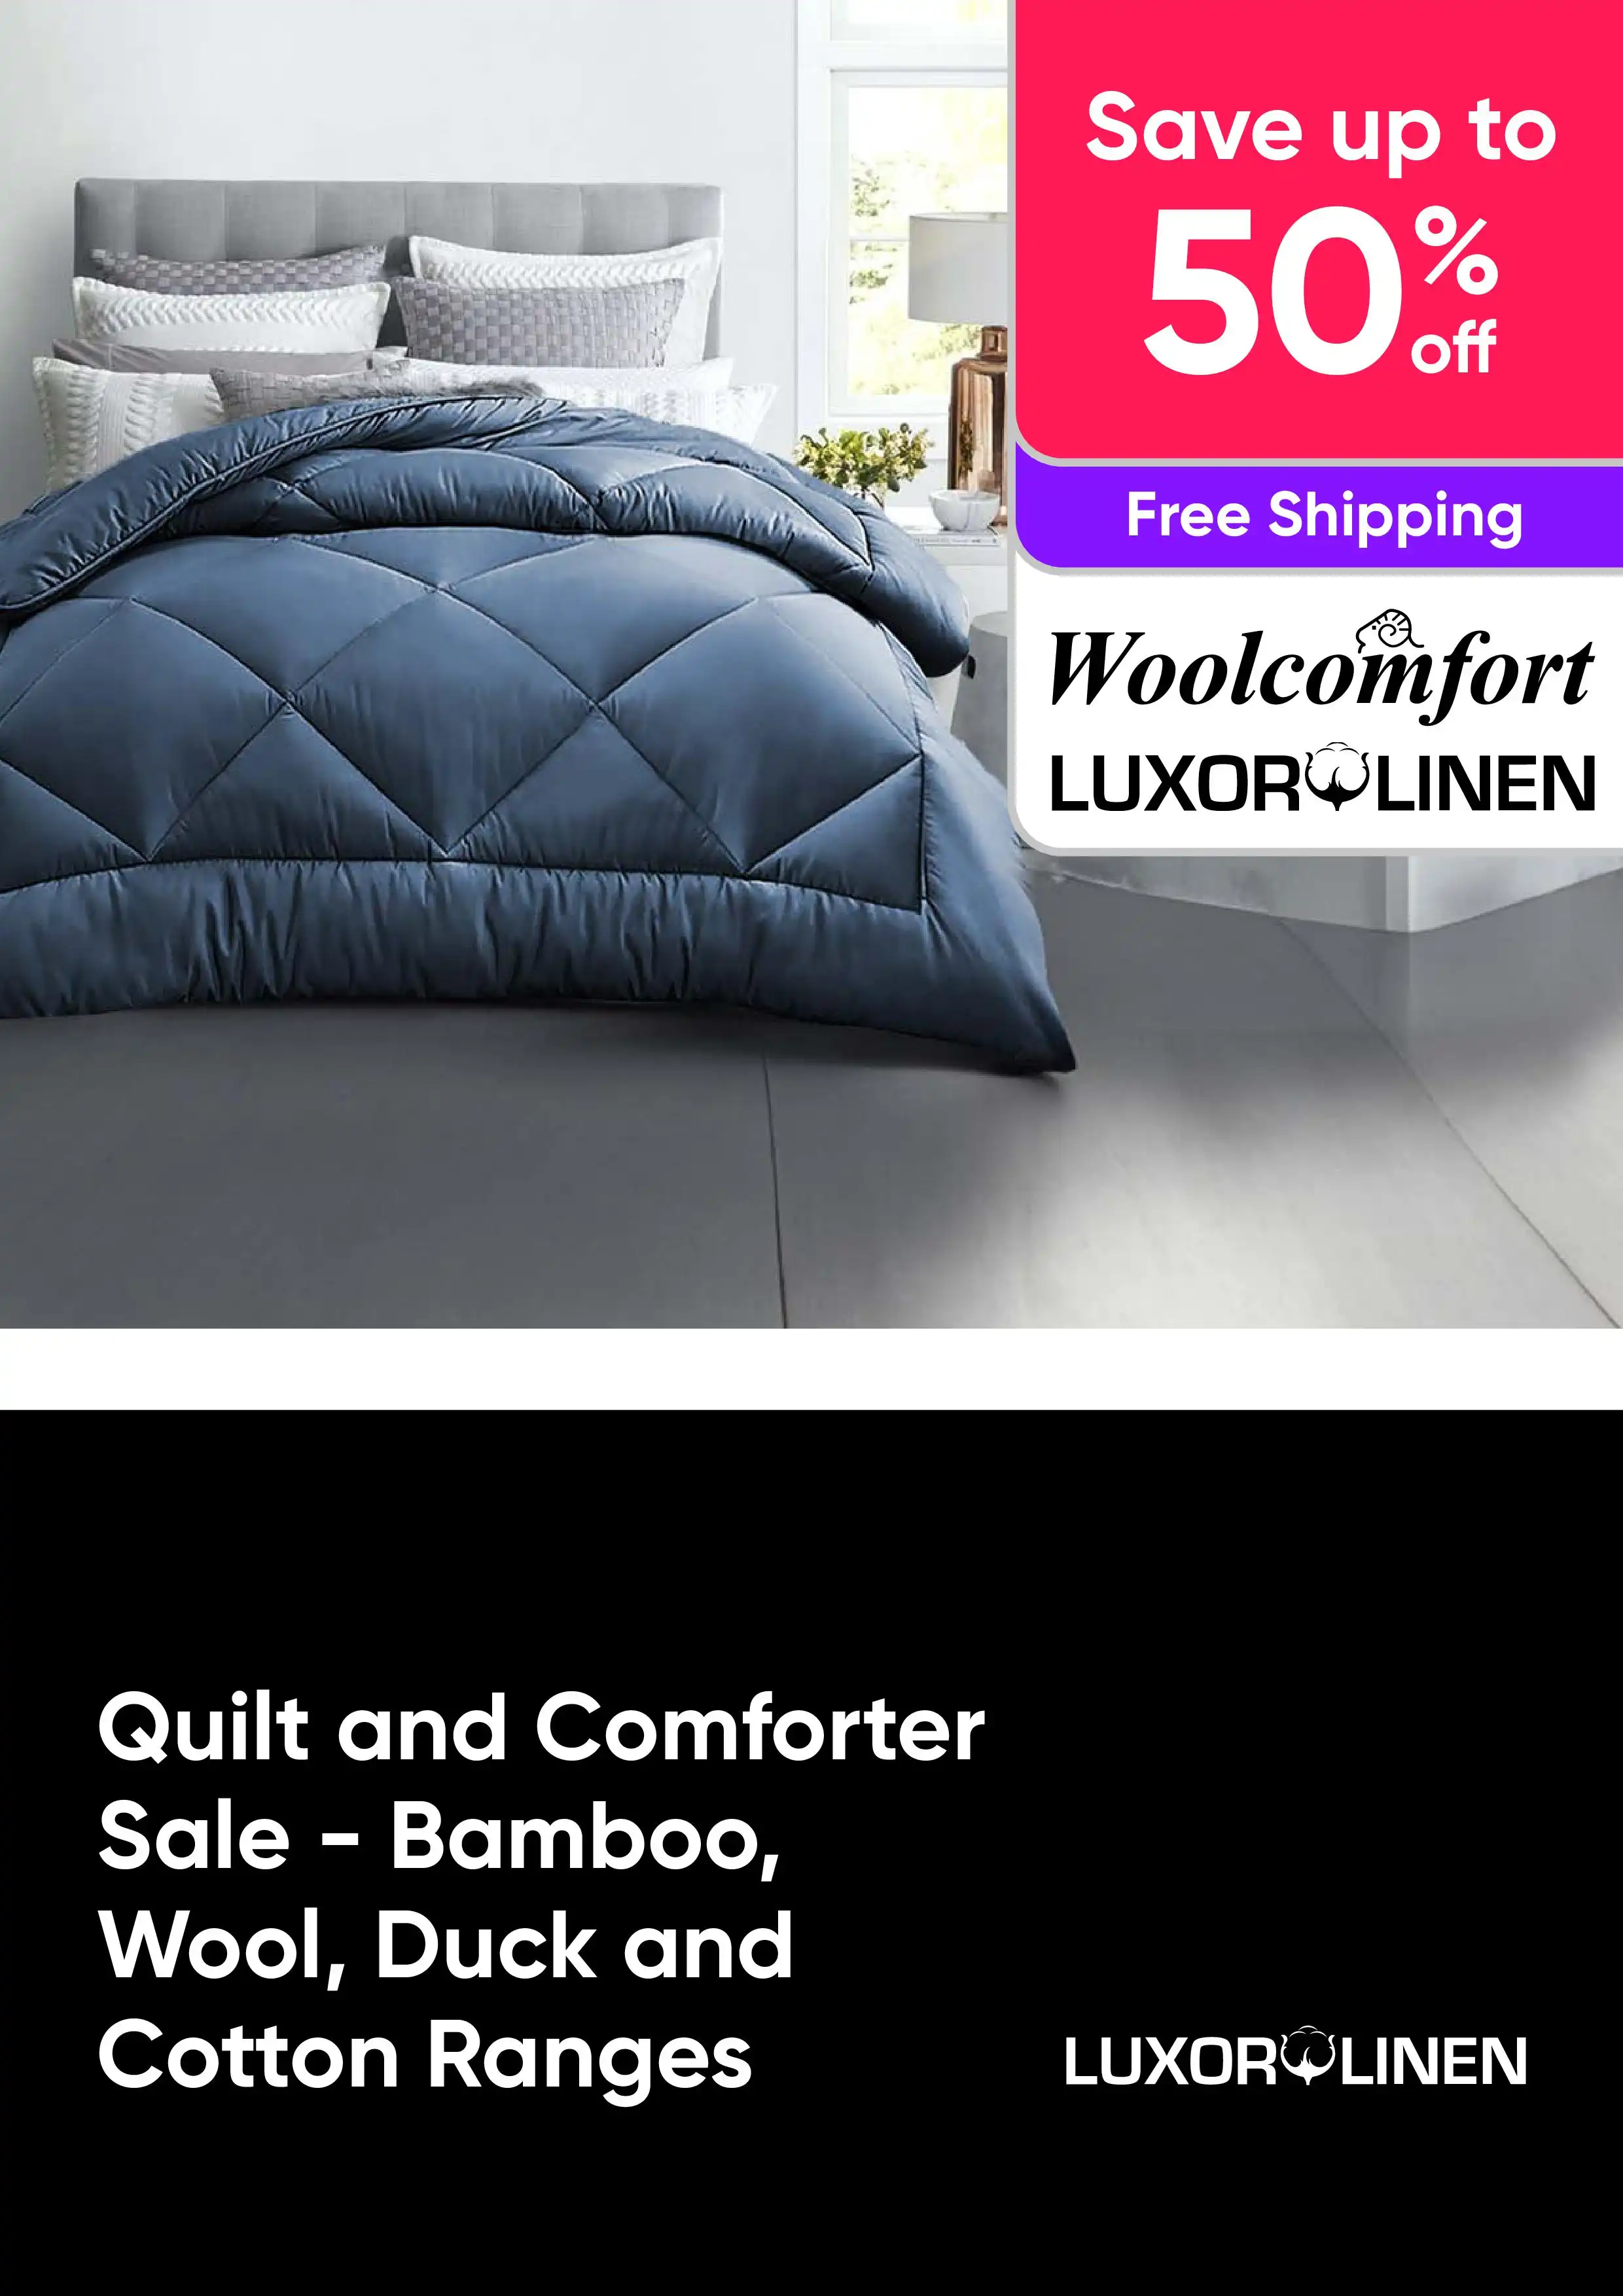 Shop A Huge Range of Quilts and Comforters - Save Up to 50% Off